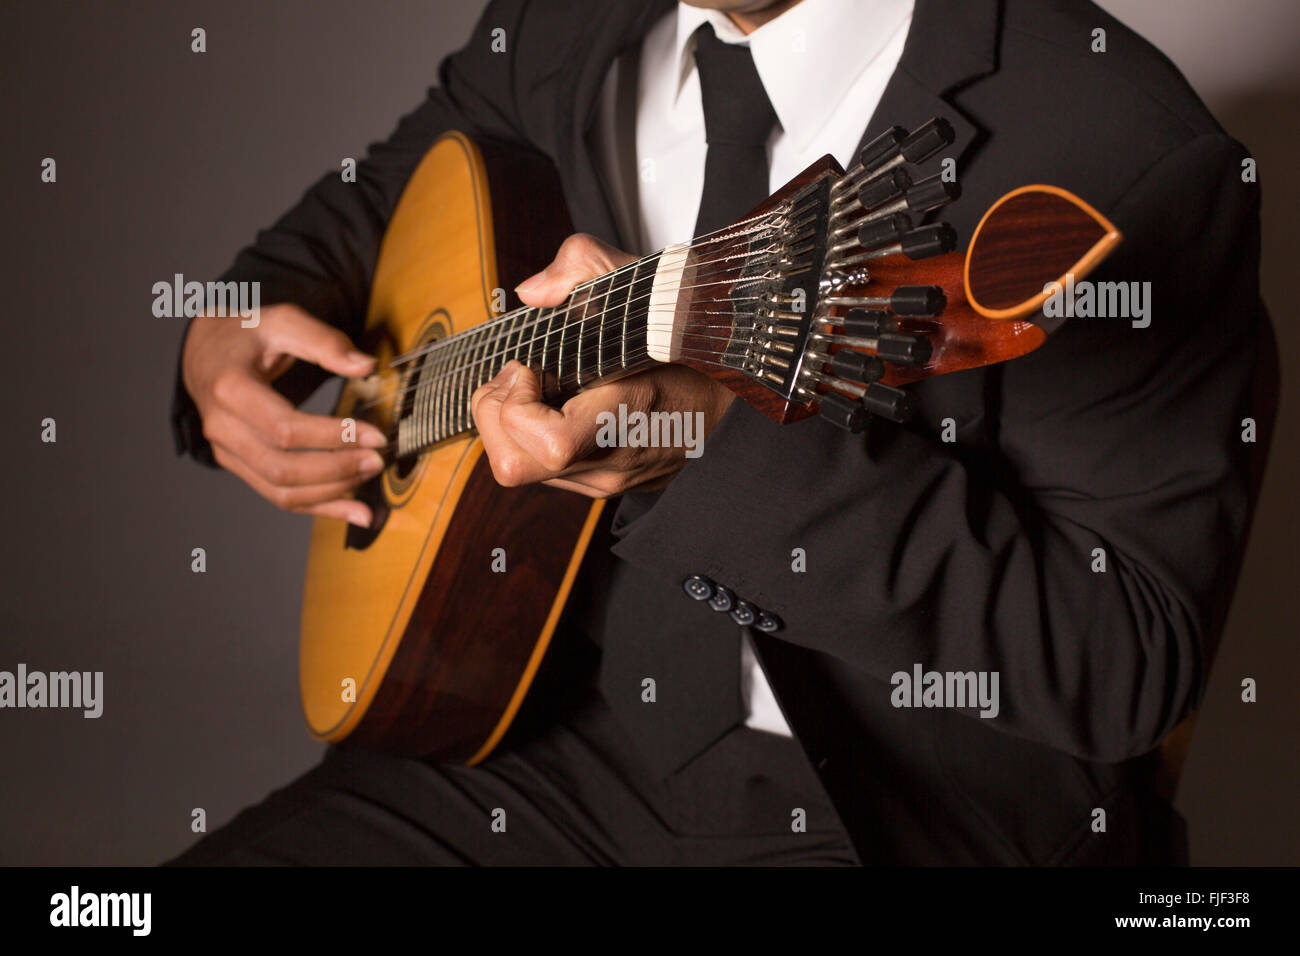 Close up shot of a man with his fingers on the frets of a portuguese guitar playing Stock Photo